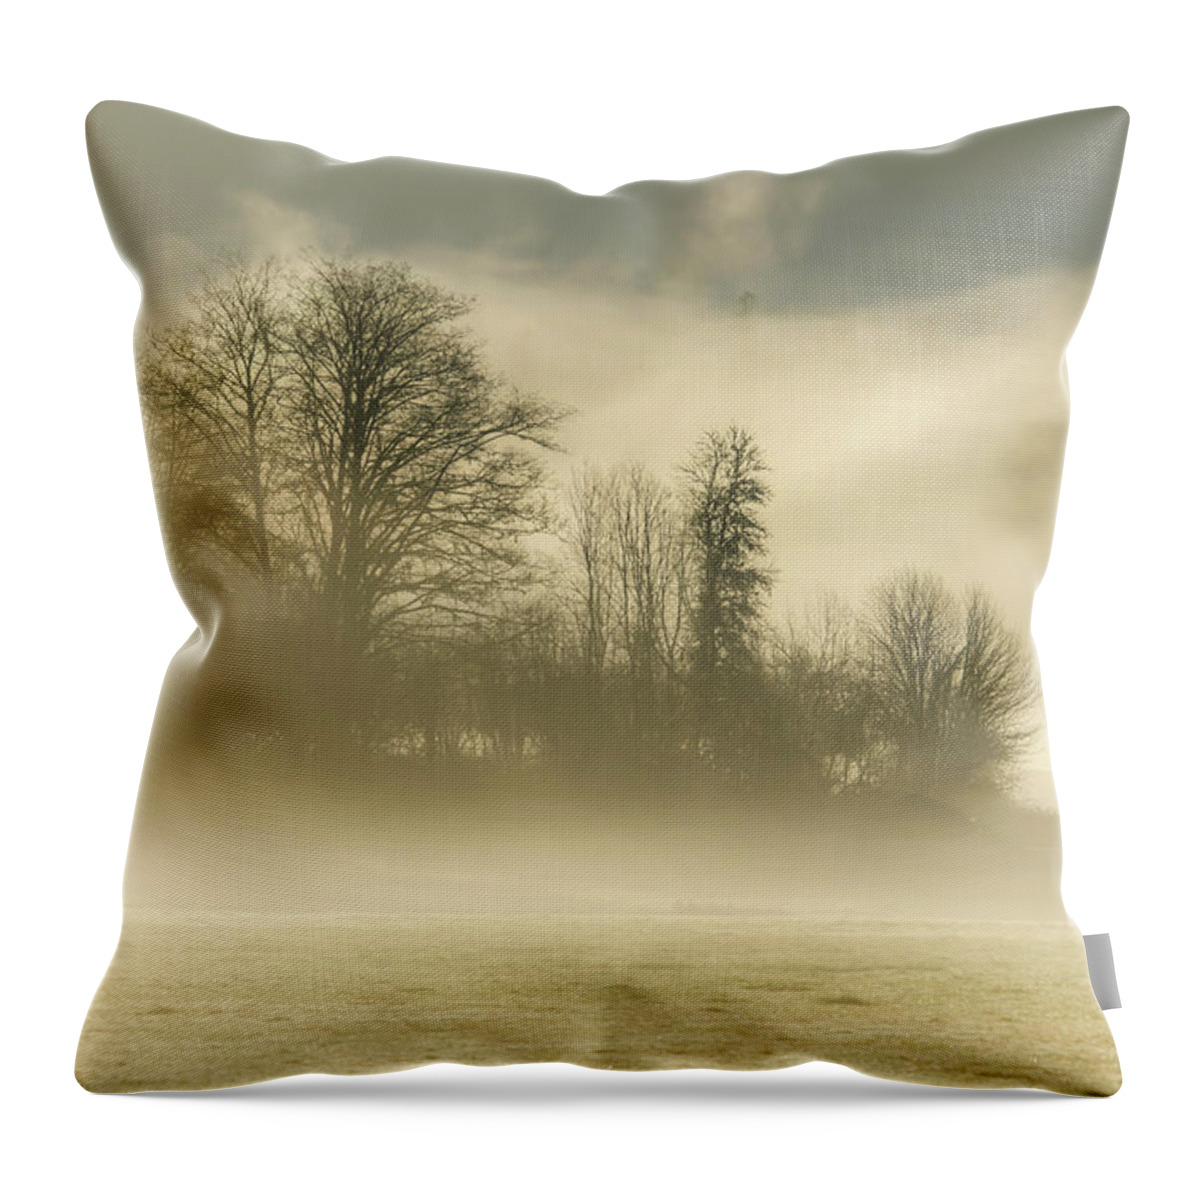 Fog Throw Pillow featuring the photograph Morning Mood 0741 by Kristina Rinell